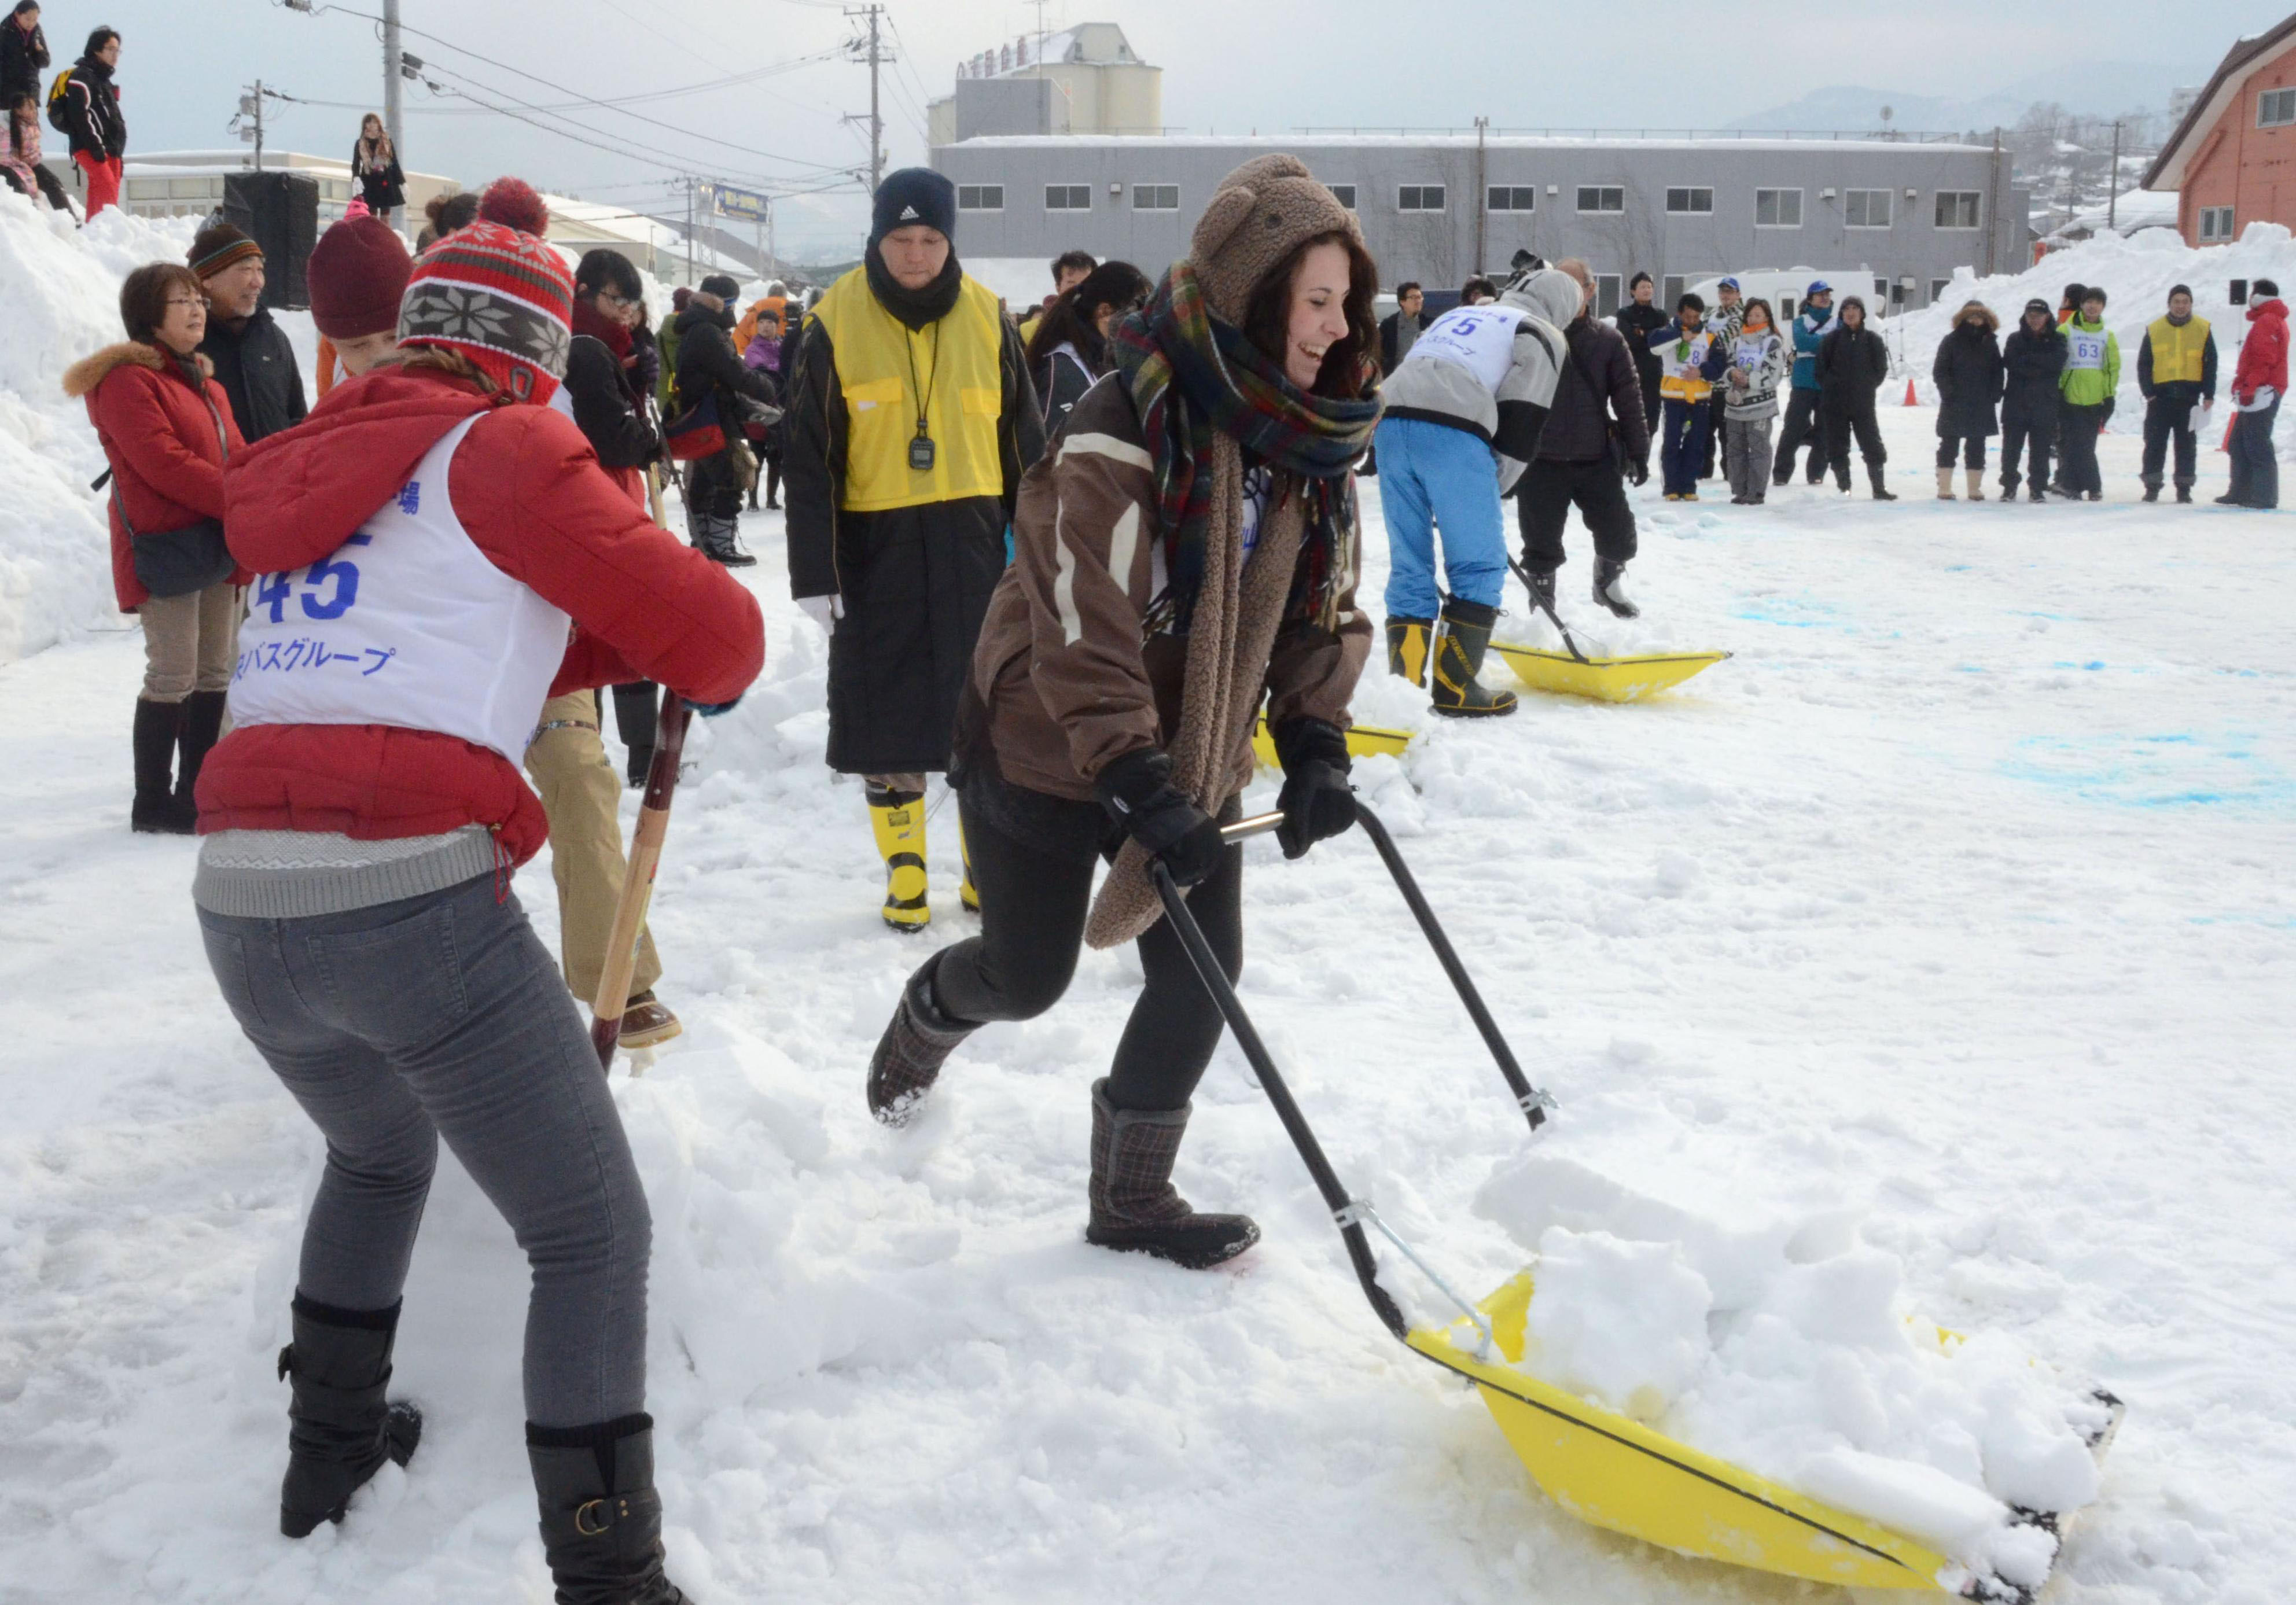 Participants scoop and carry snow in an international competition on snow shoveling held in Otaru, Hokkaido, in January. | KYODO